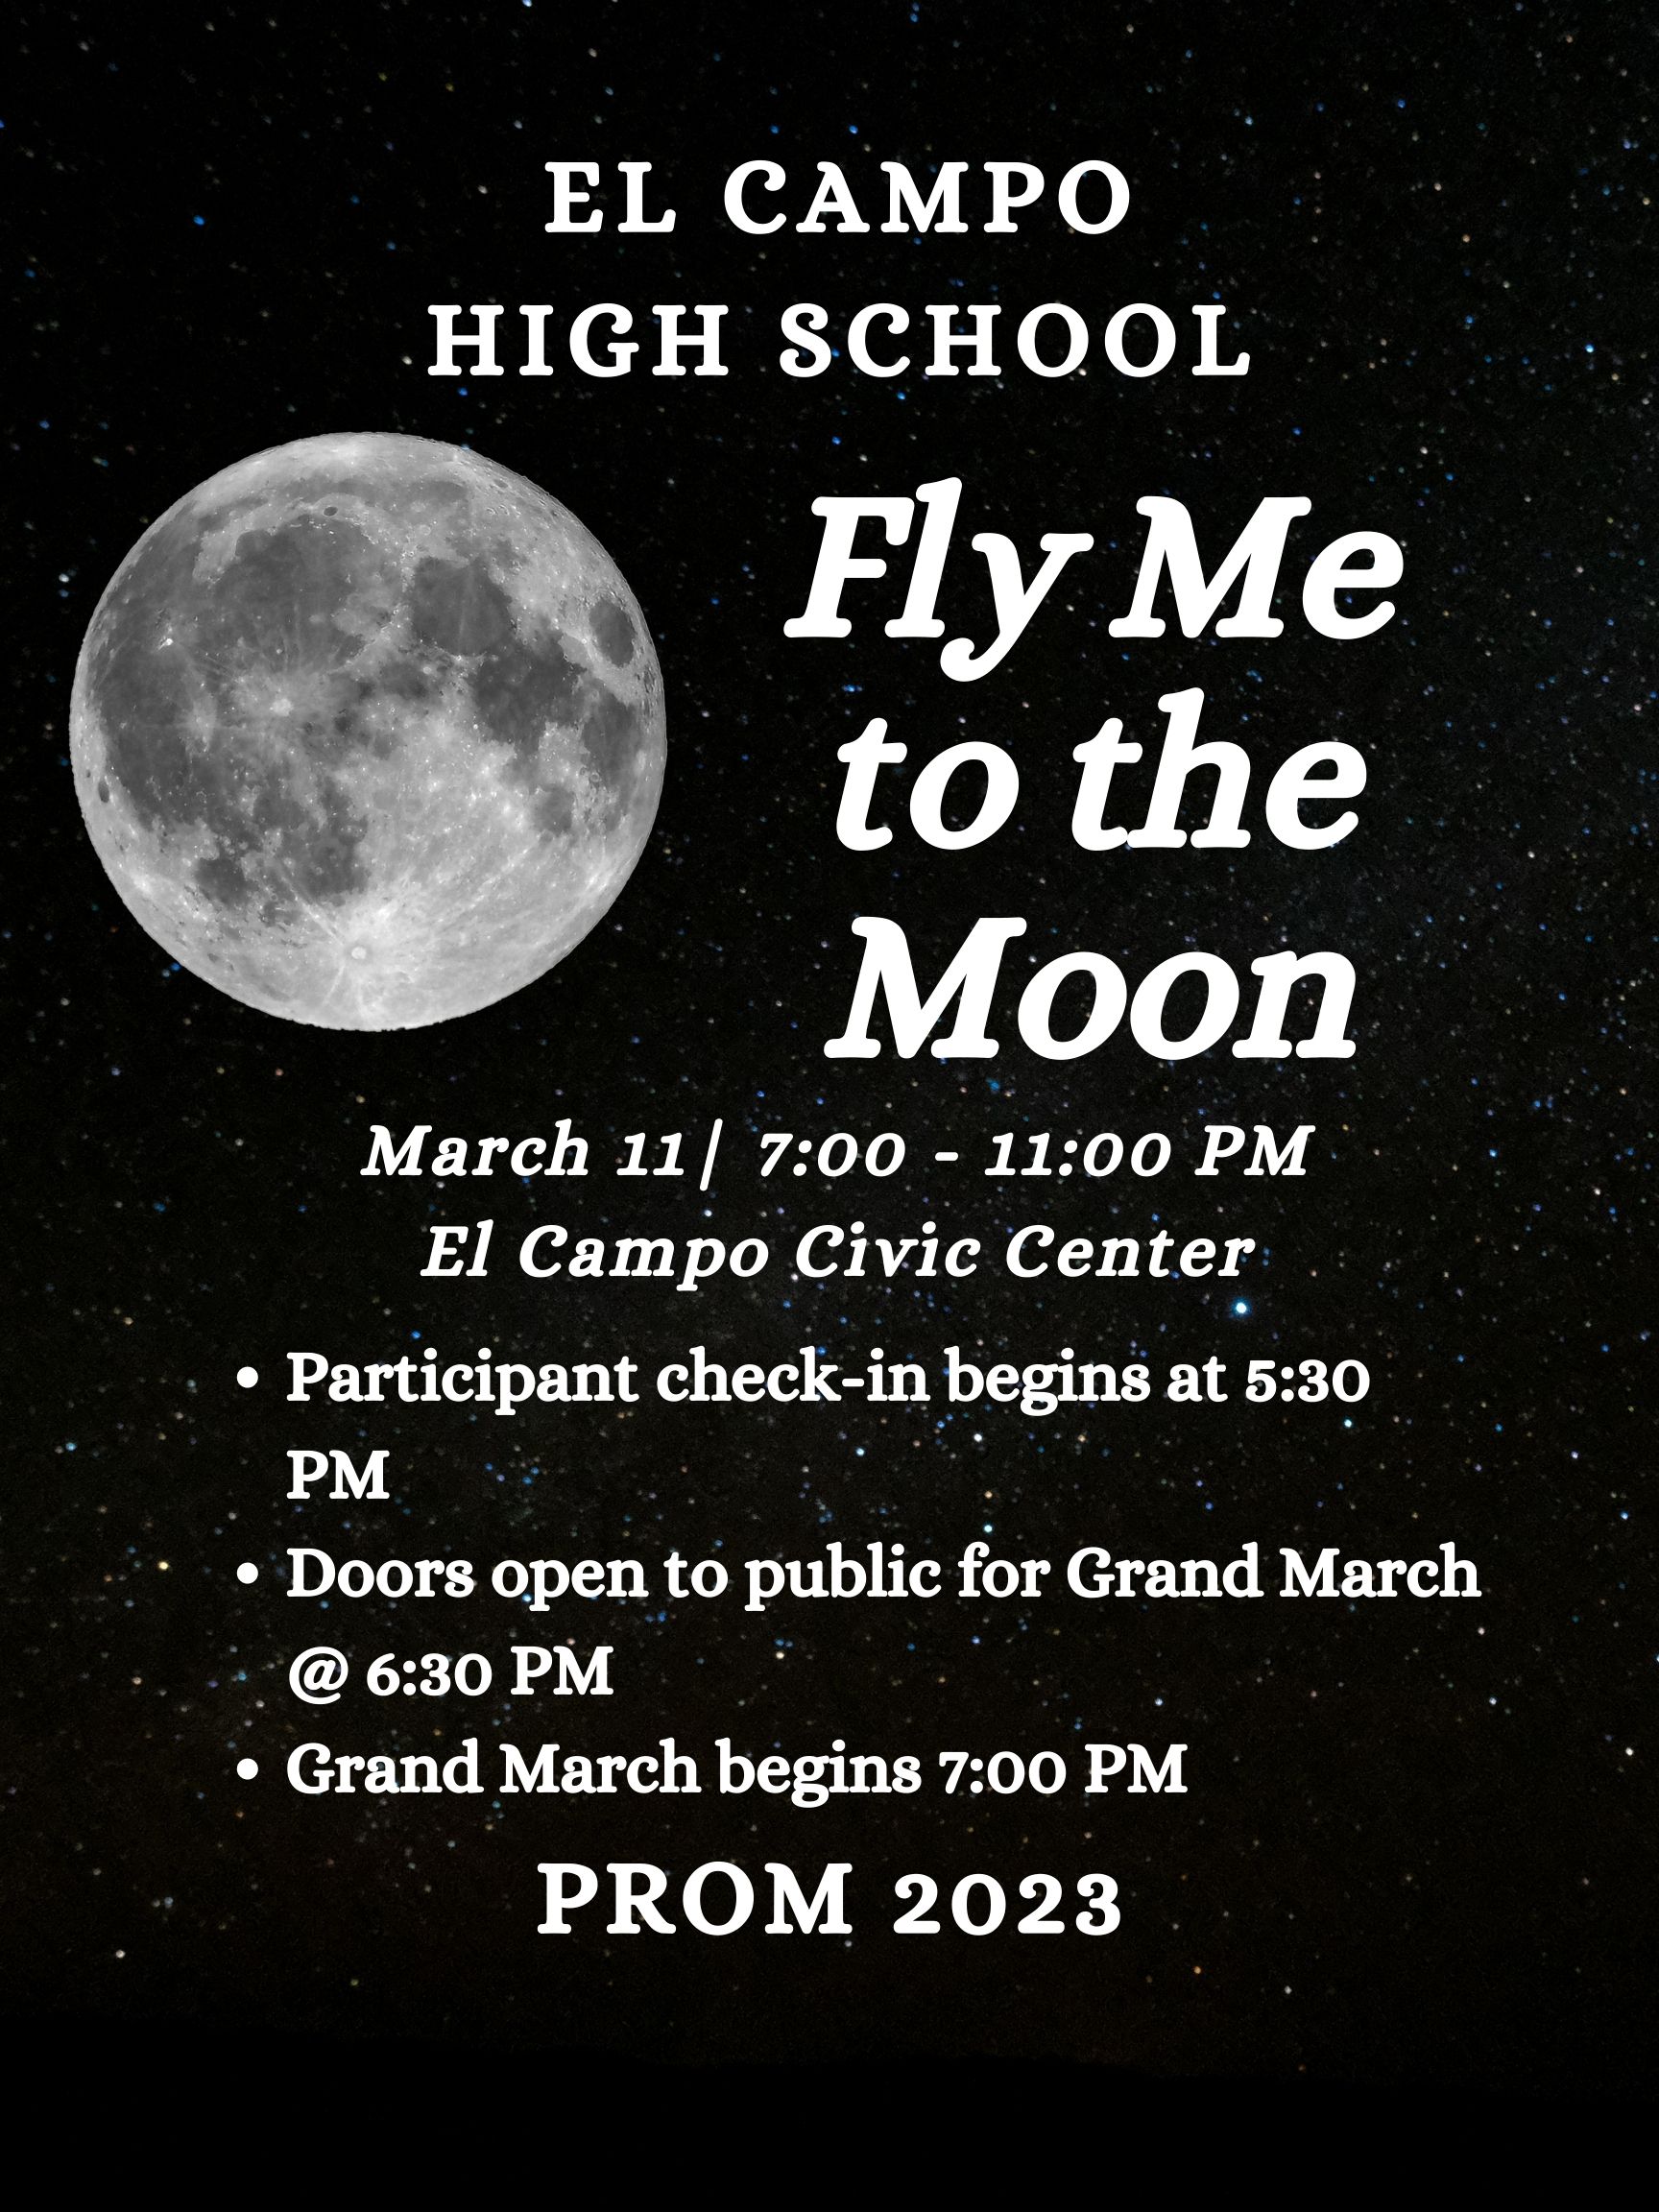 prom theme "fly me to the moon" march 11 2023 civic center 7-11pm